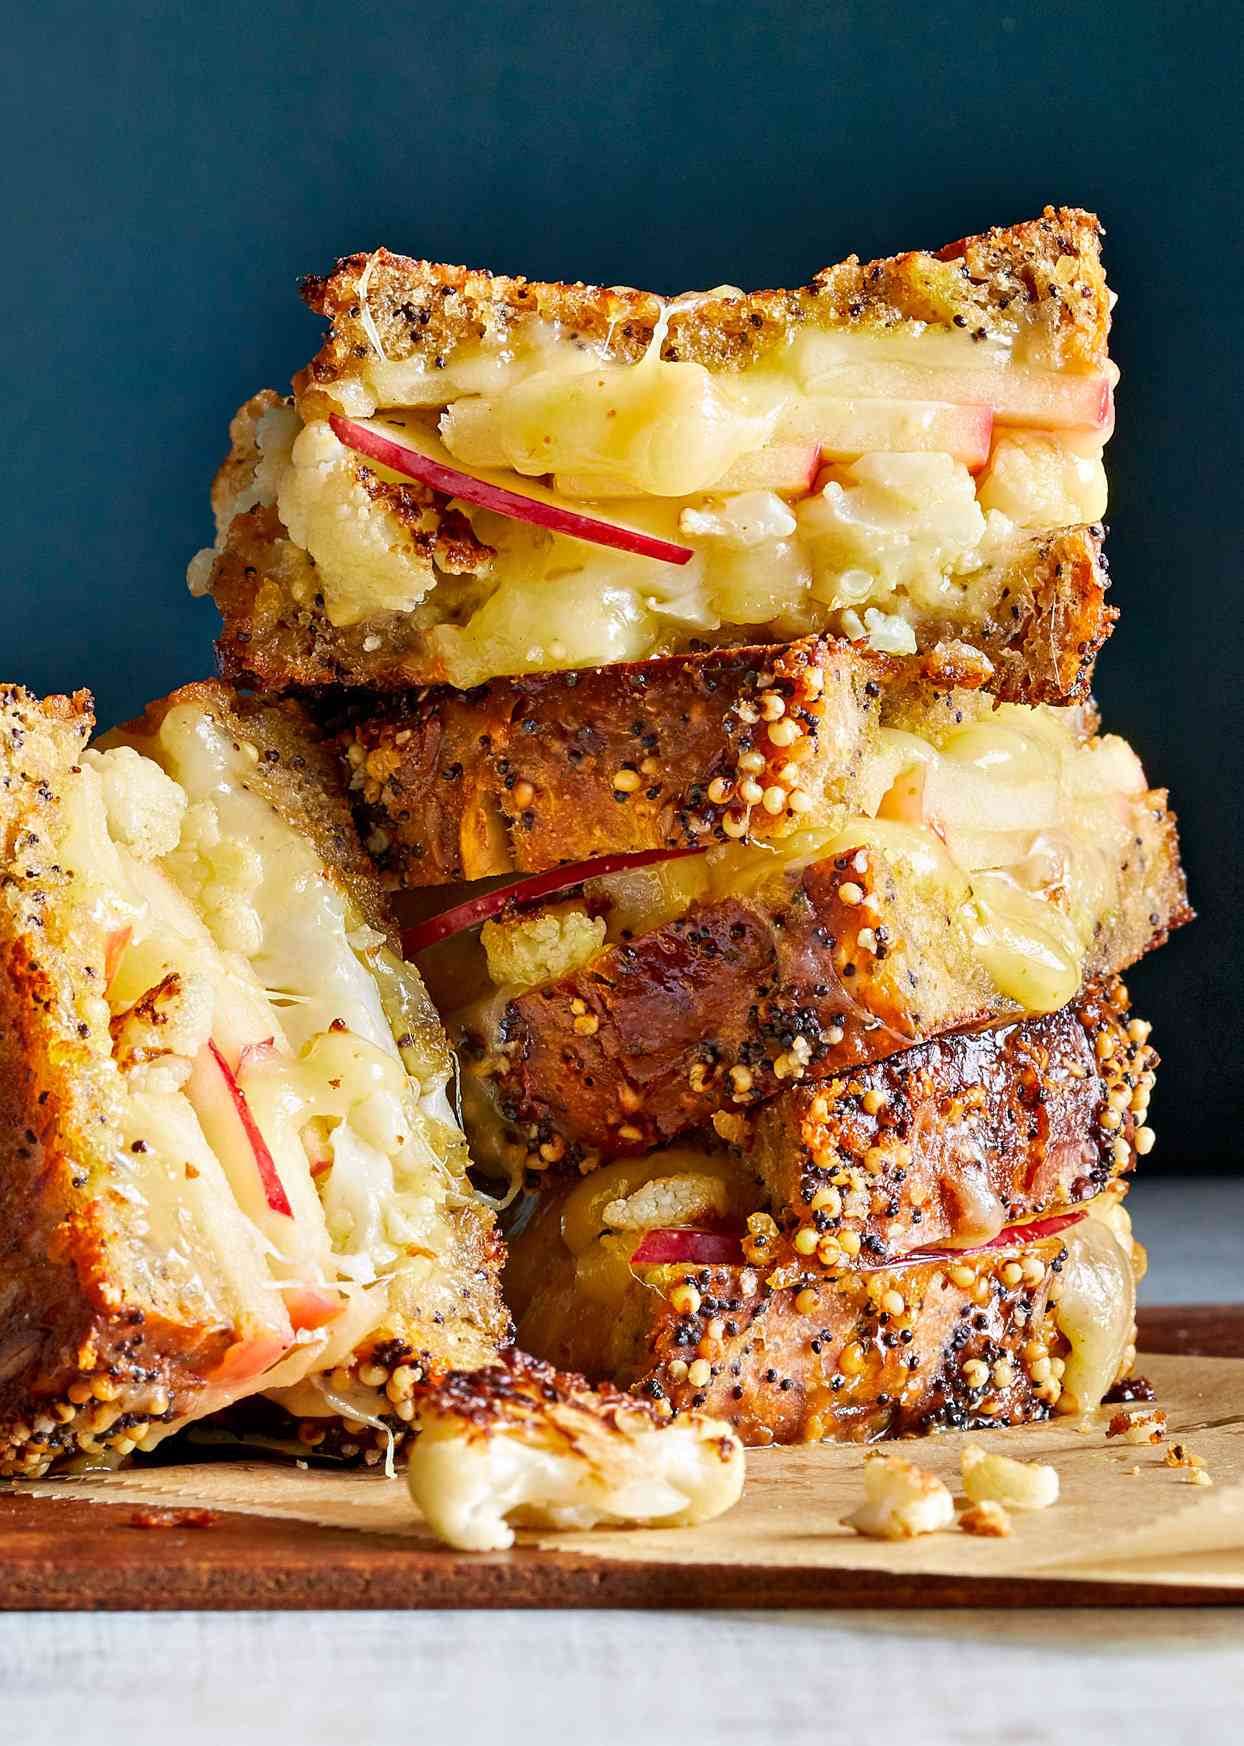 <p>Glam up your grilled cheese with curry mayonnaise, skillet-roasted cauliflower, and sweet apple—it's a delicious combo that's far more than the sum of its part.</p>
                          <p>Related: Super Sandwich Recipes</p>
                          